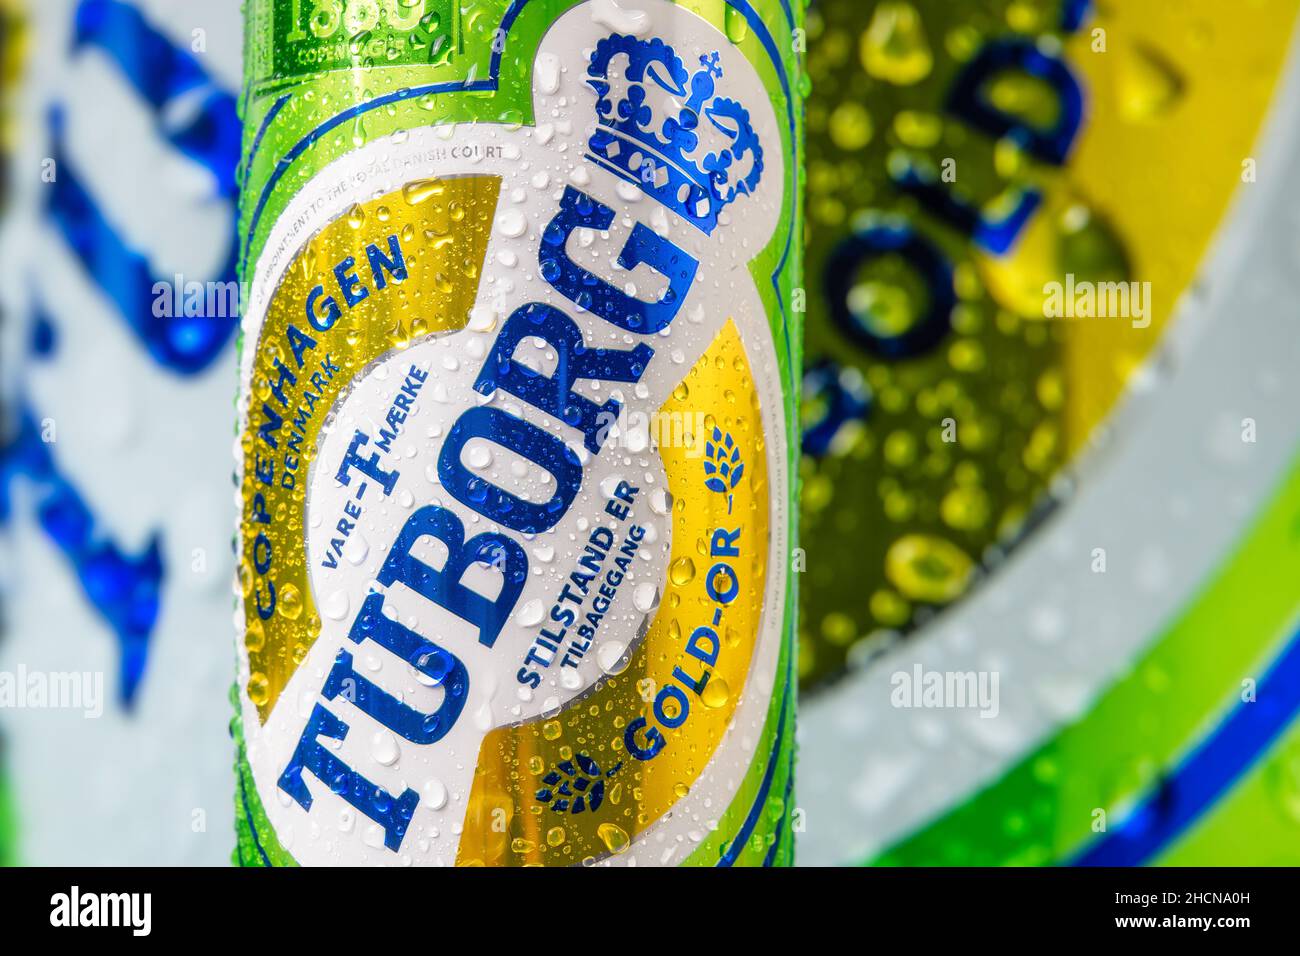 Label design of a Tuborg beer can Dec. 30, 2021 Stock Photo